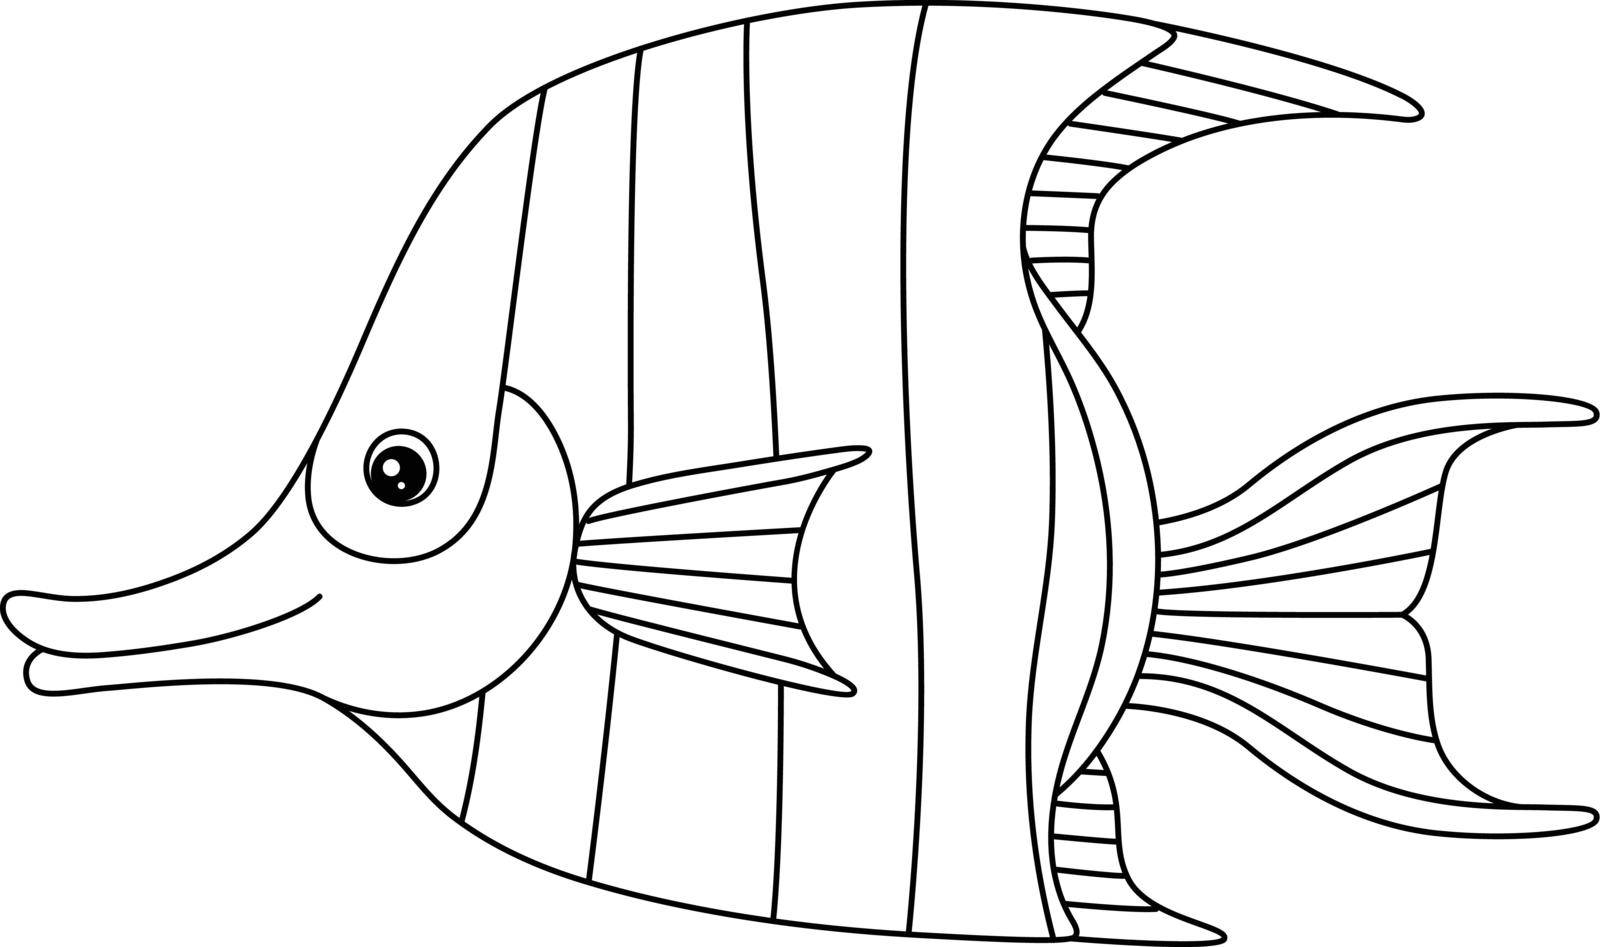 A cute and funny coloring page of an angelfish. Provides hours of coloring fun for children. To color, this page is very easy. Suitable for little kids and toddlers.